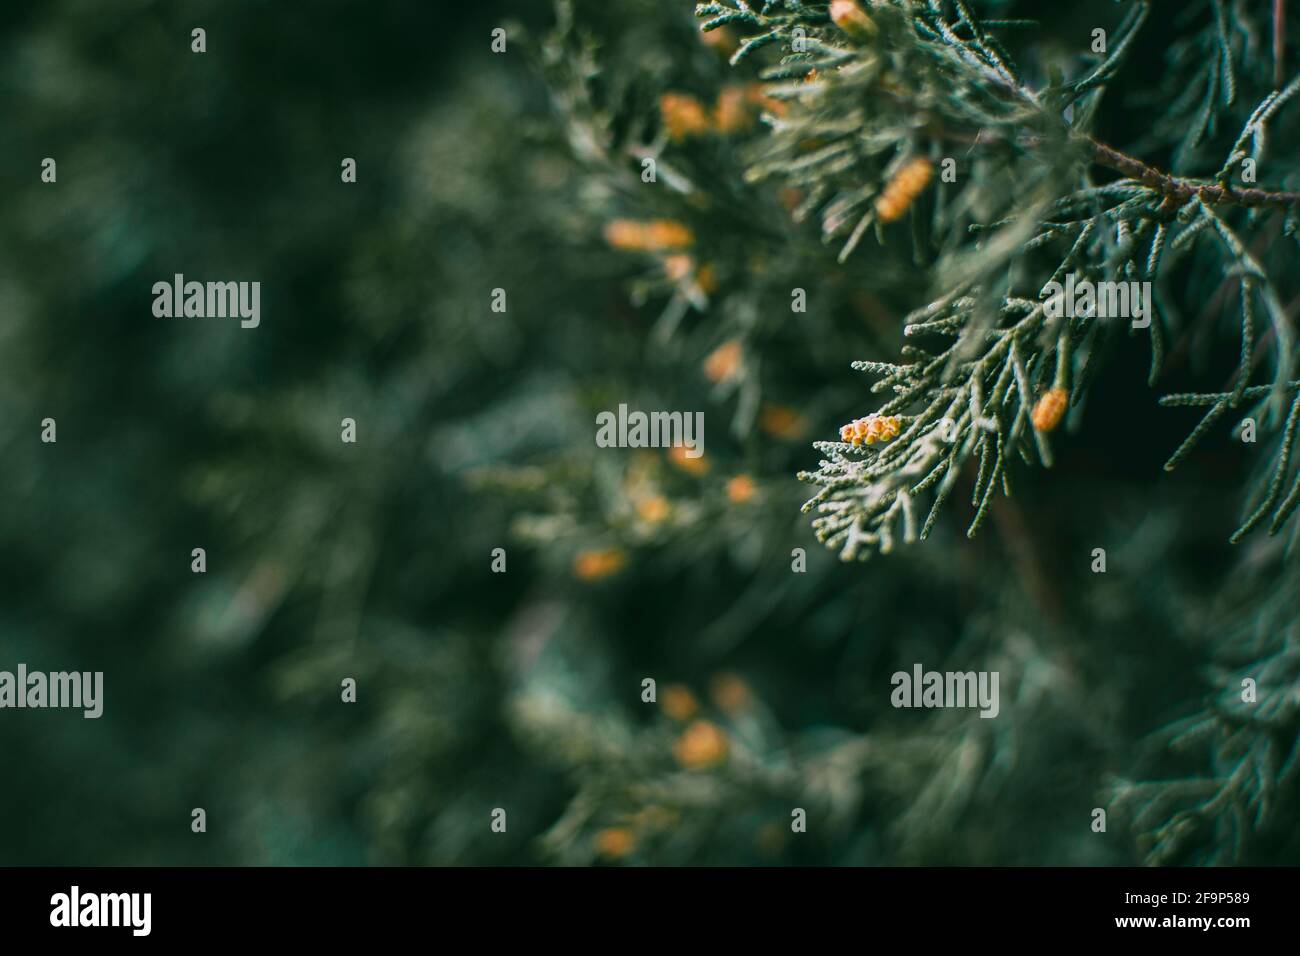 green leaves close up of cupressus in nature with blur background Stock Photo